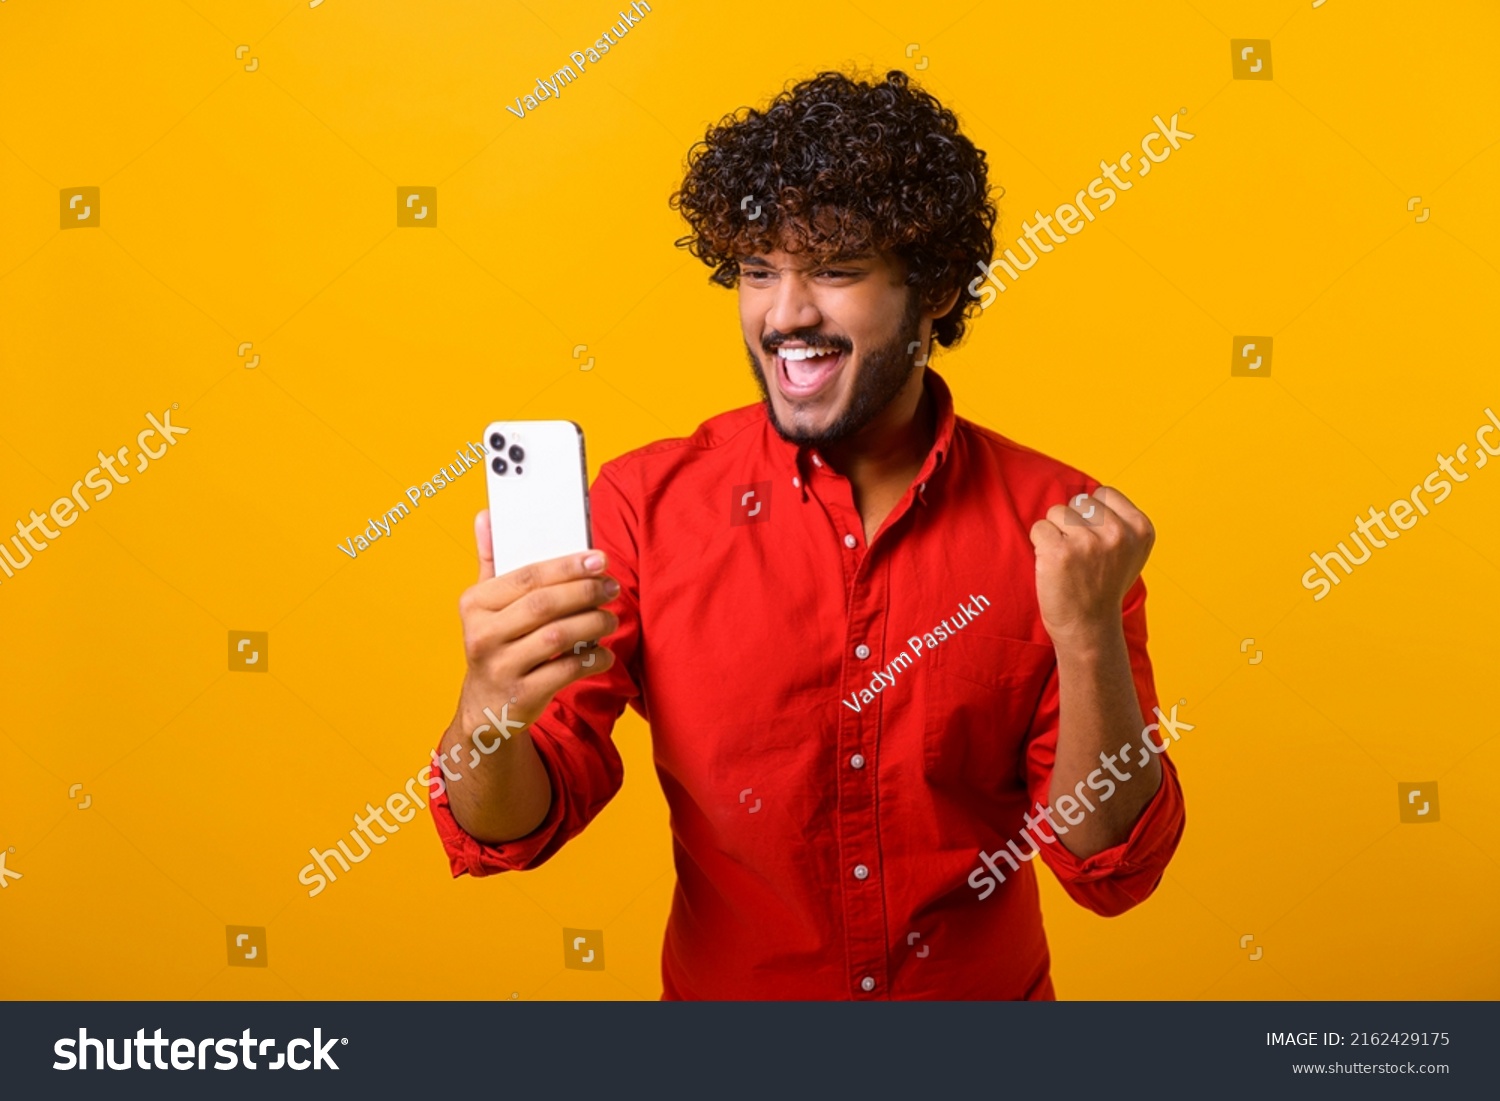 Happy satisfied man with beard holding smartphone and smiling making yes gesture, celebrating online lottery or giveaway victory. Indoor studio shot isolated on orange background #2162429175